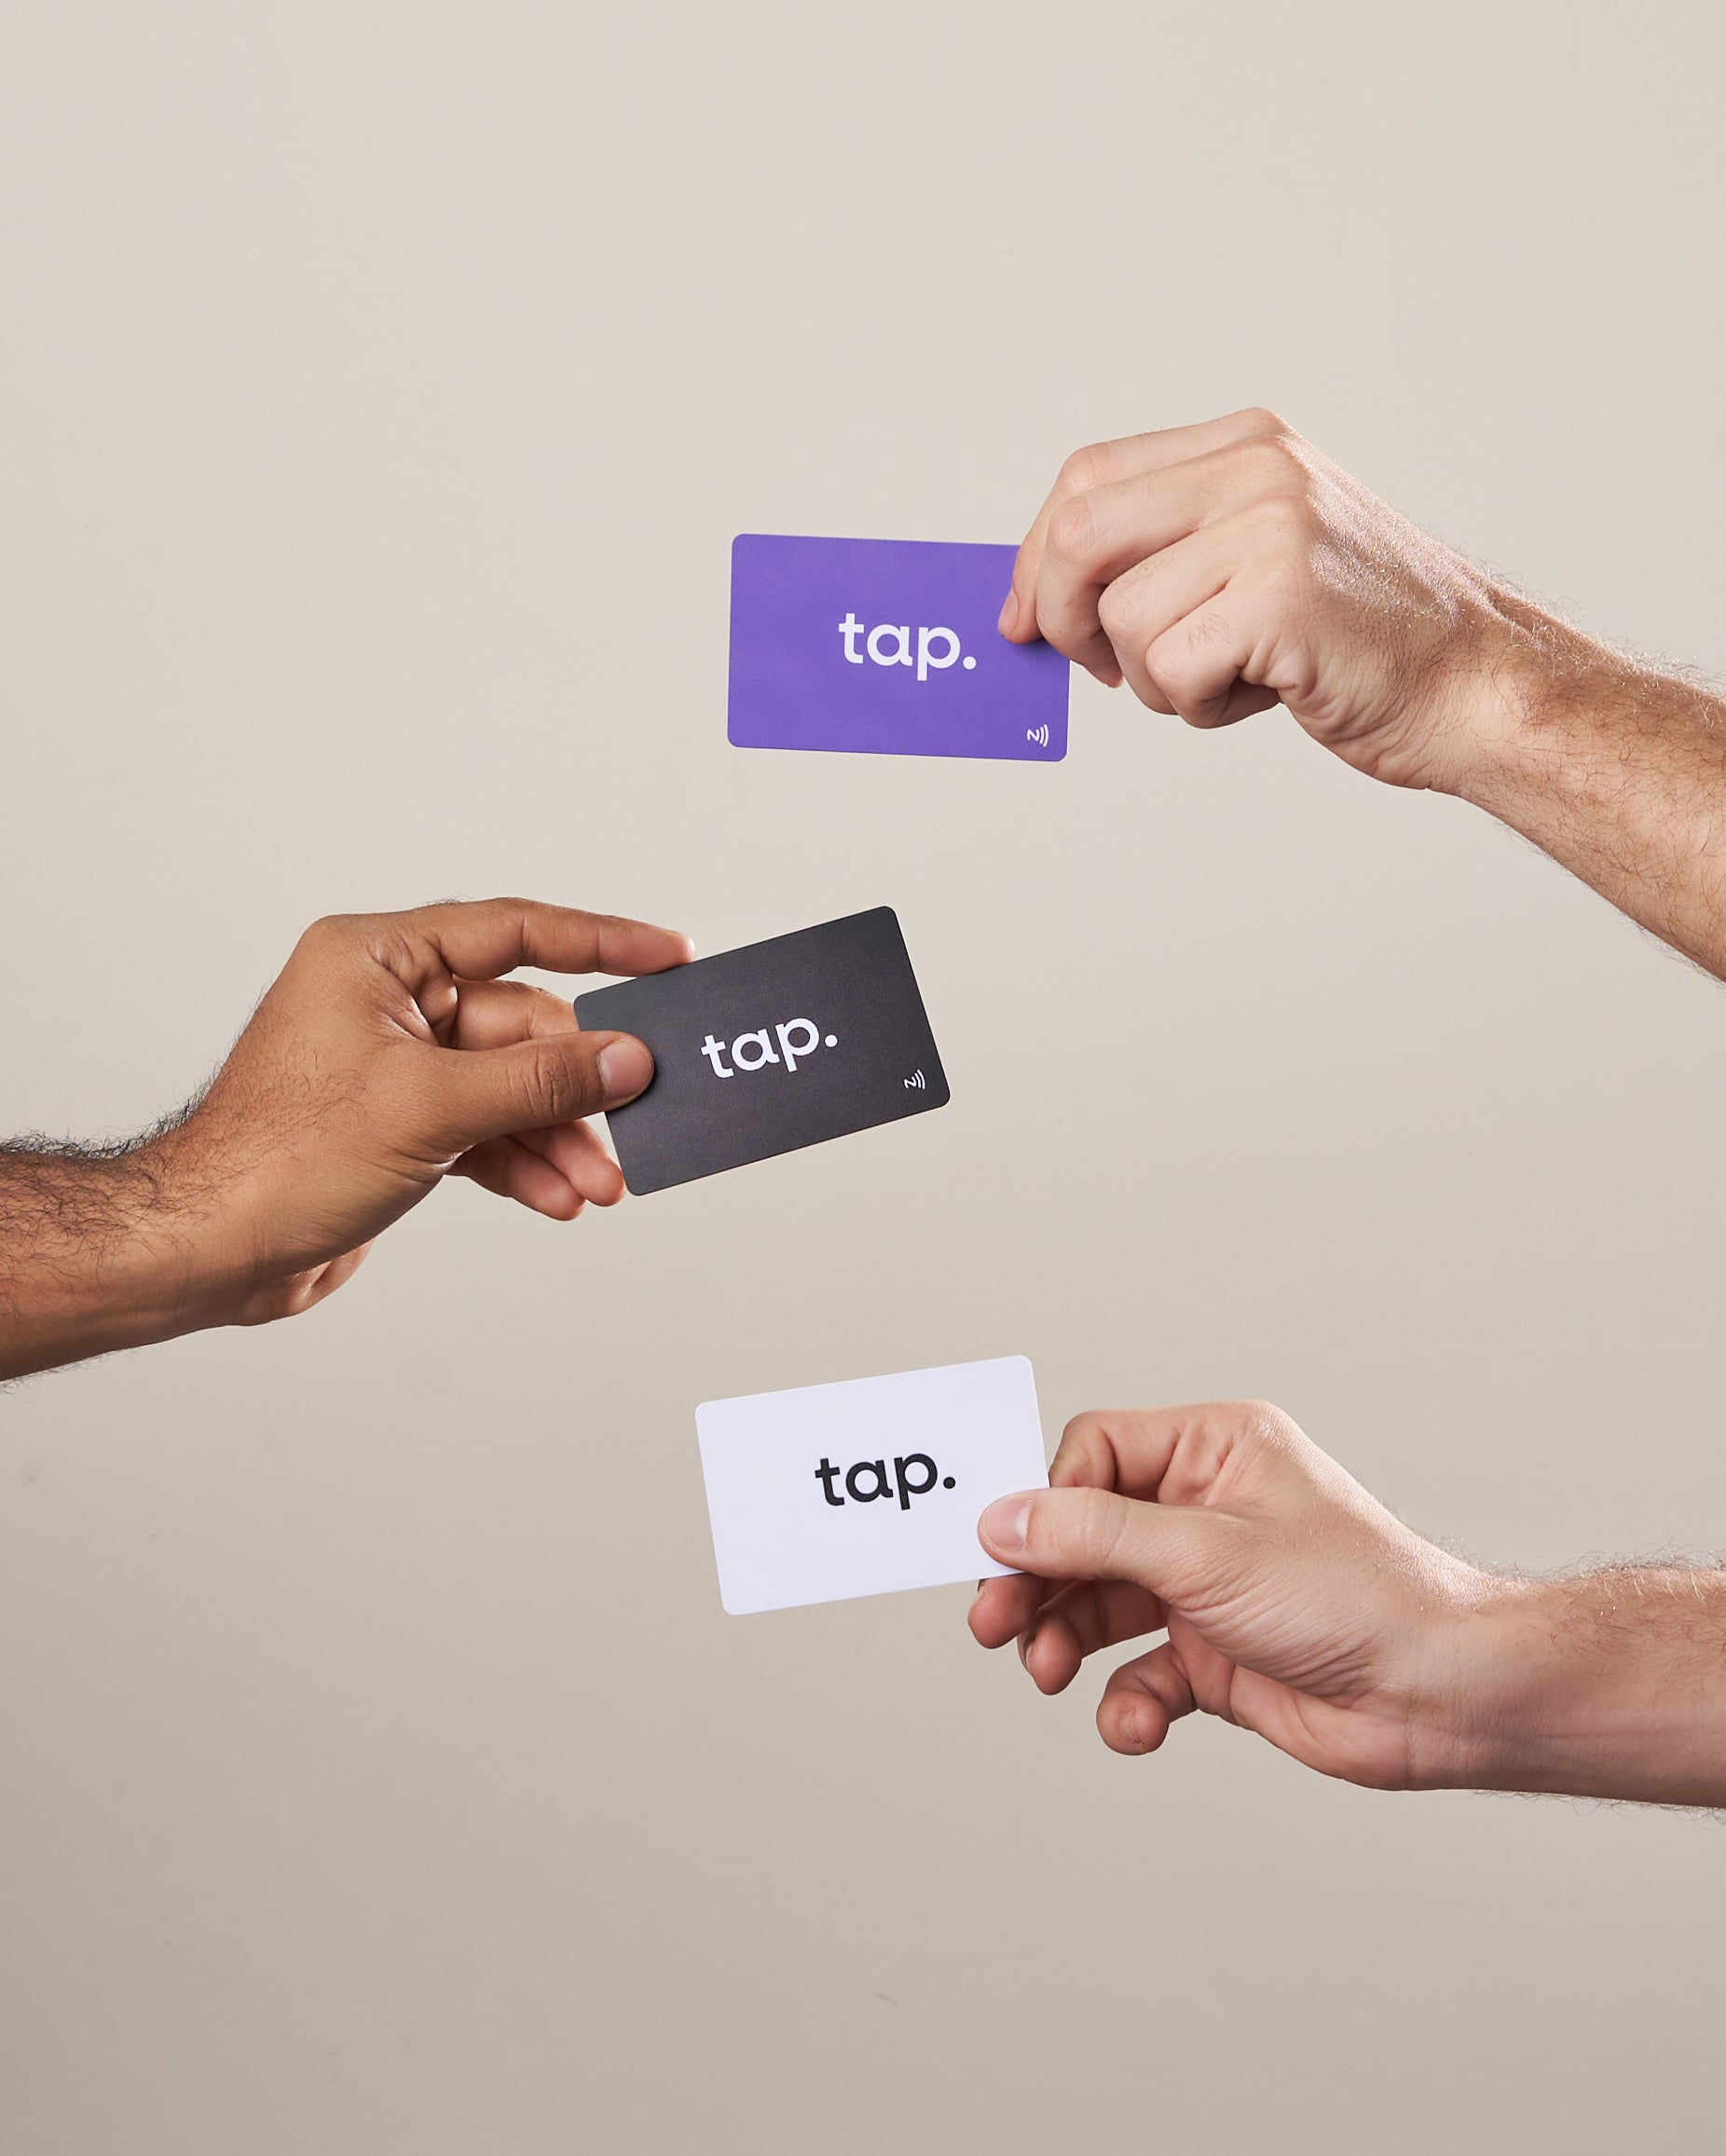 Three hands exchanging colorful tap NFC cards on a neutral background.